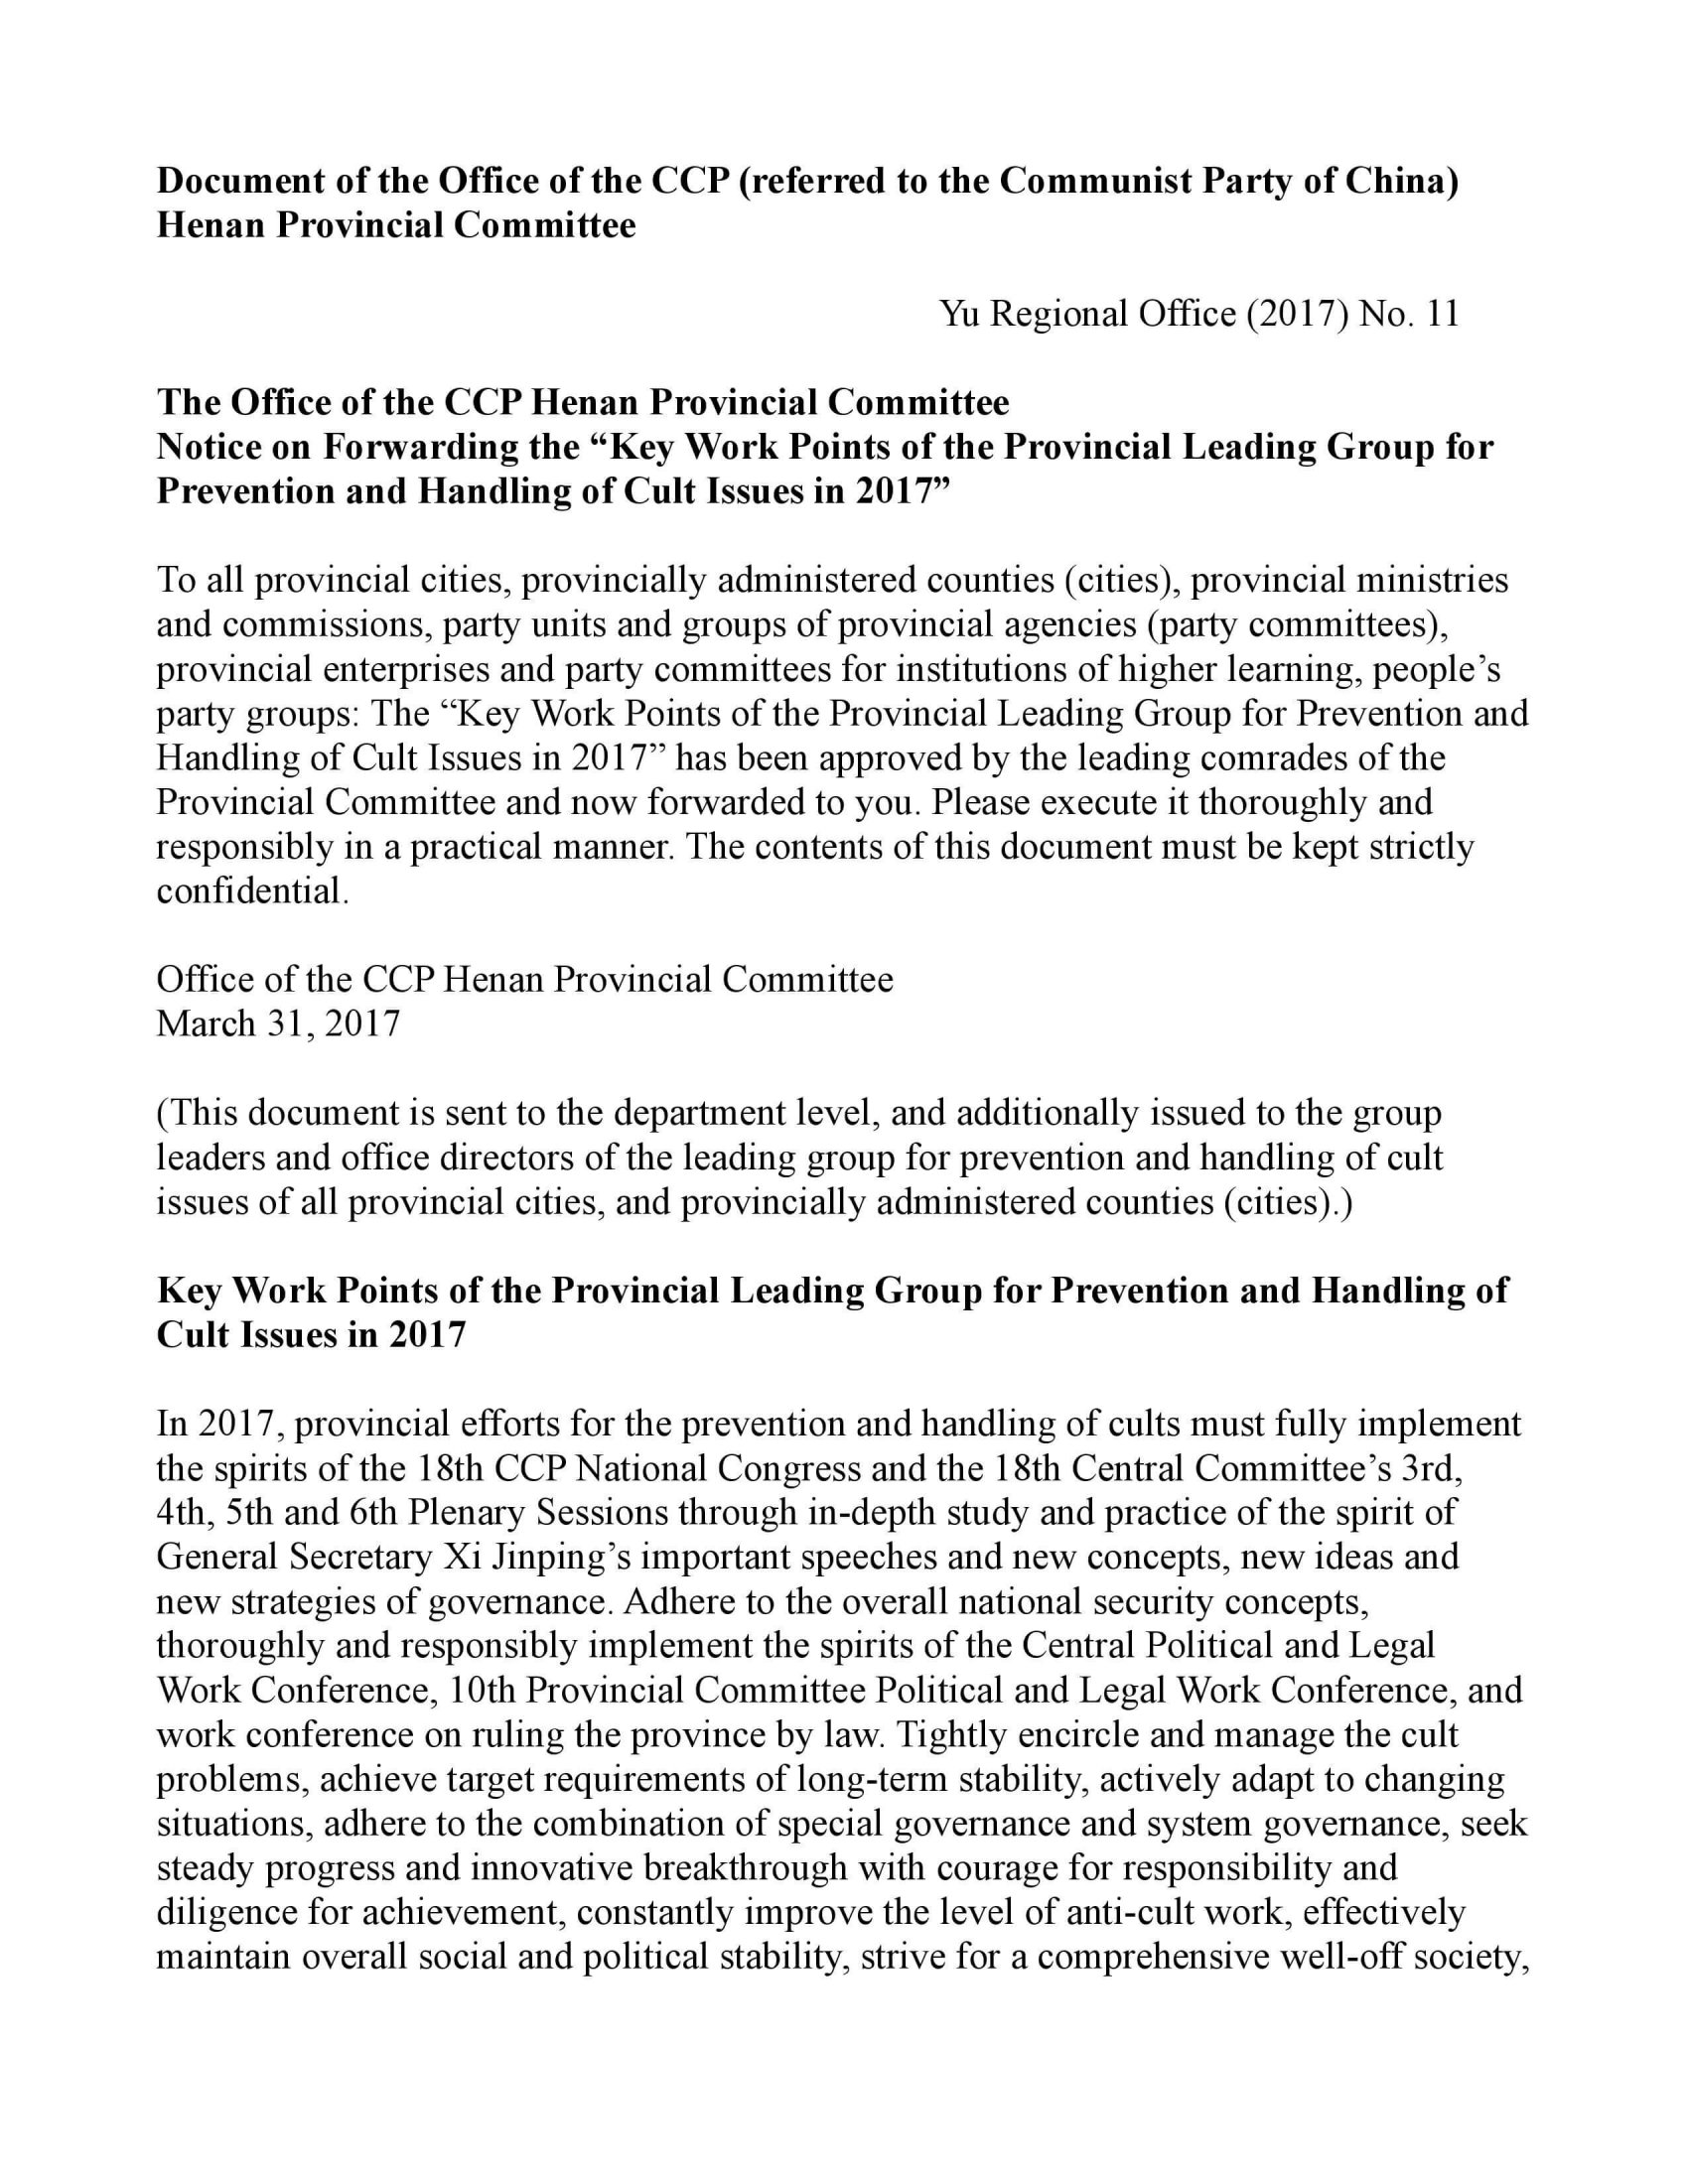 Notice on Forwarding the “Key Work Points of the Provincial Leading Group for Prevention and Handling of Cult Issues in 2017” (English Translation)